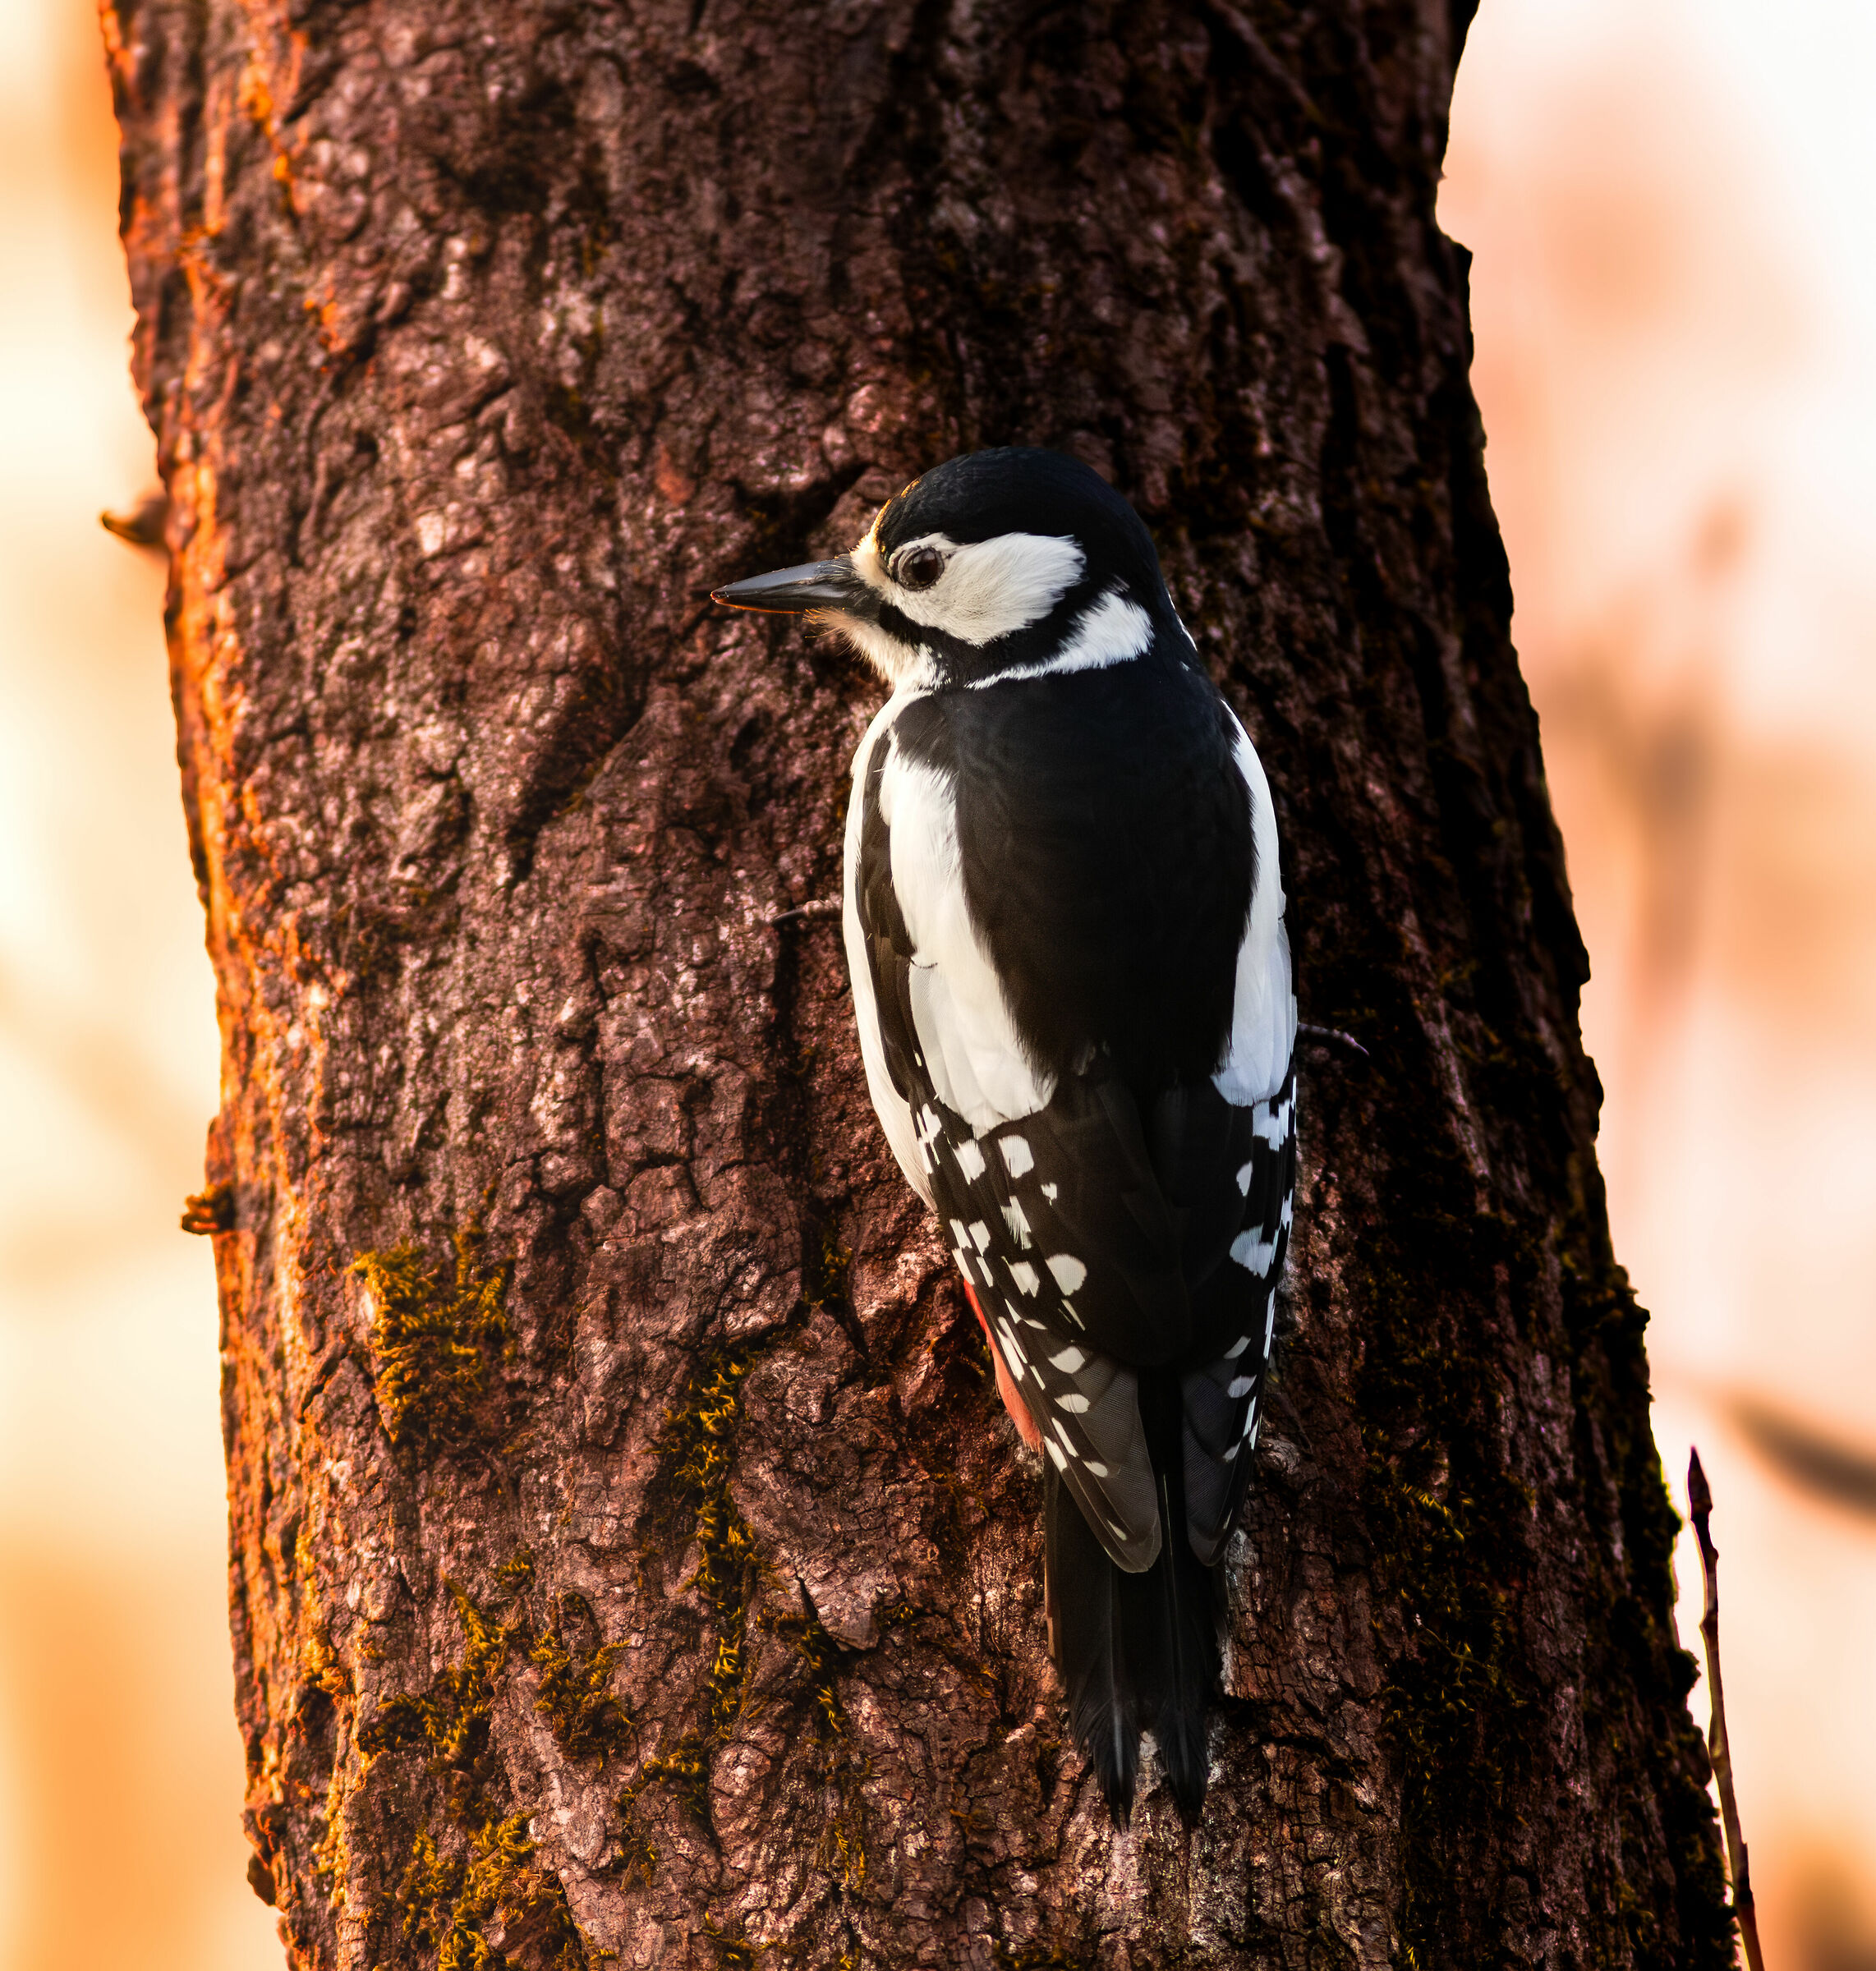 Great spotted woodpecker at sunset...